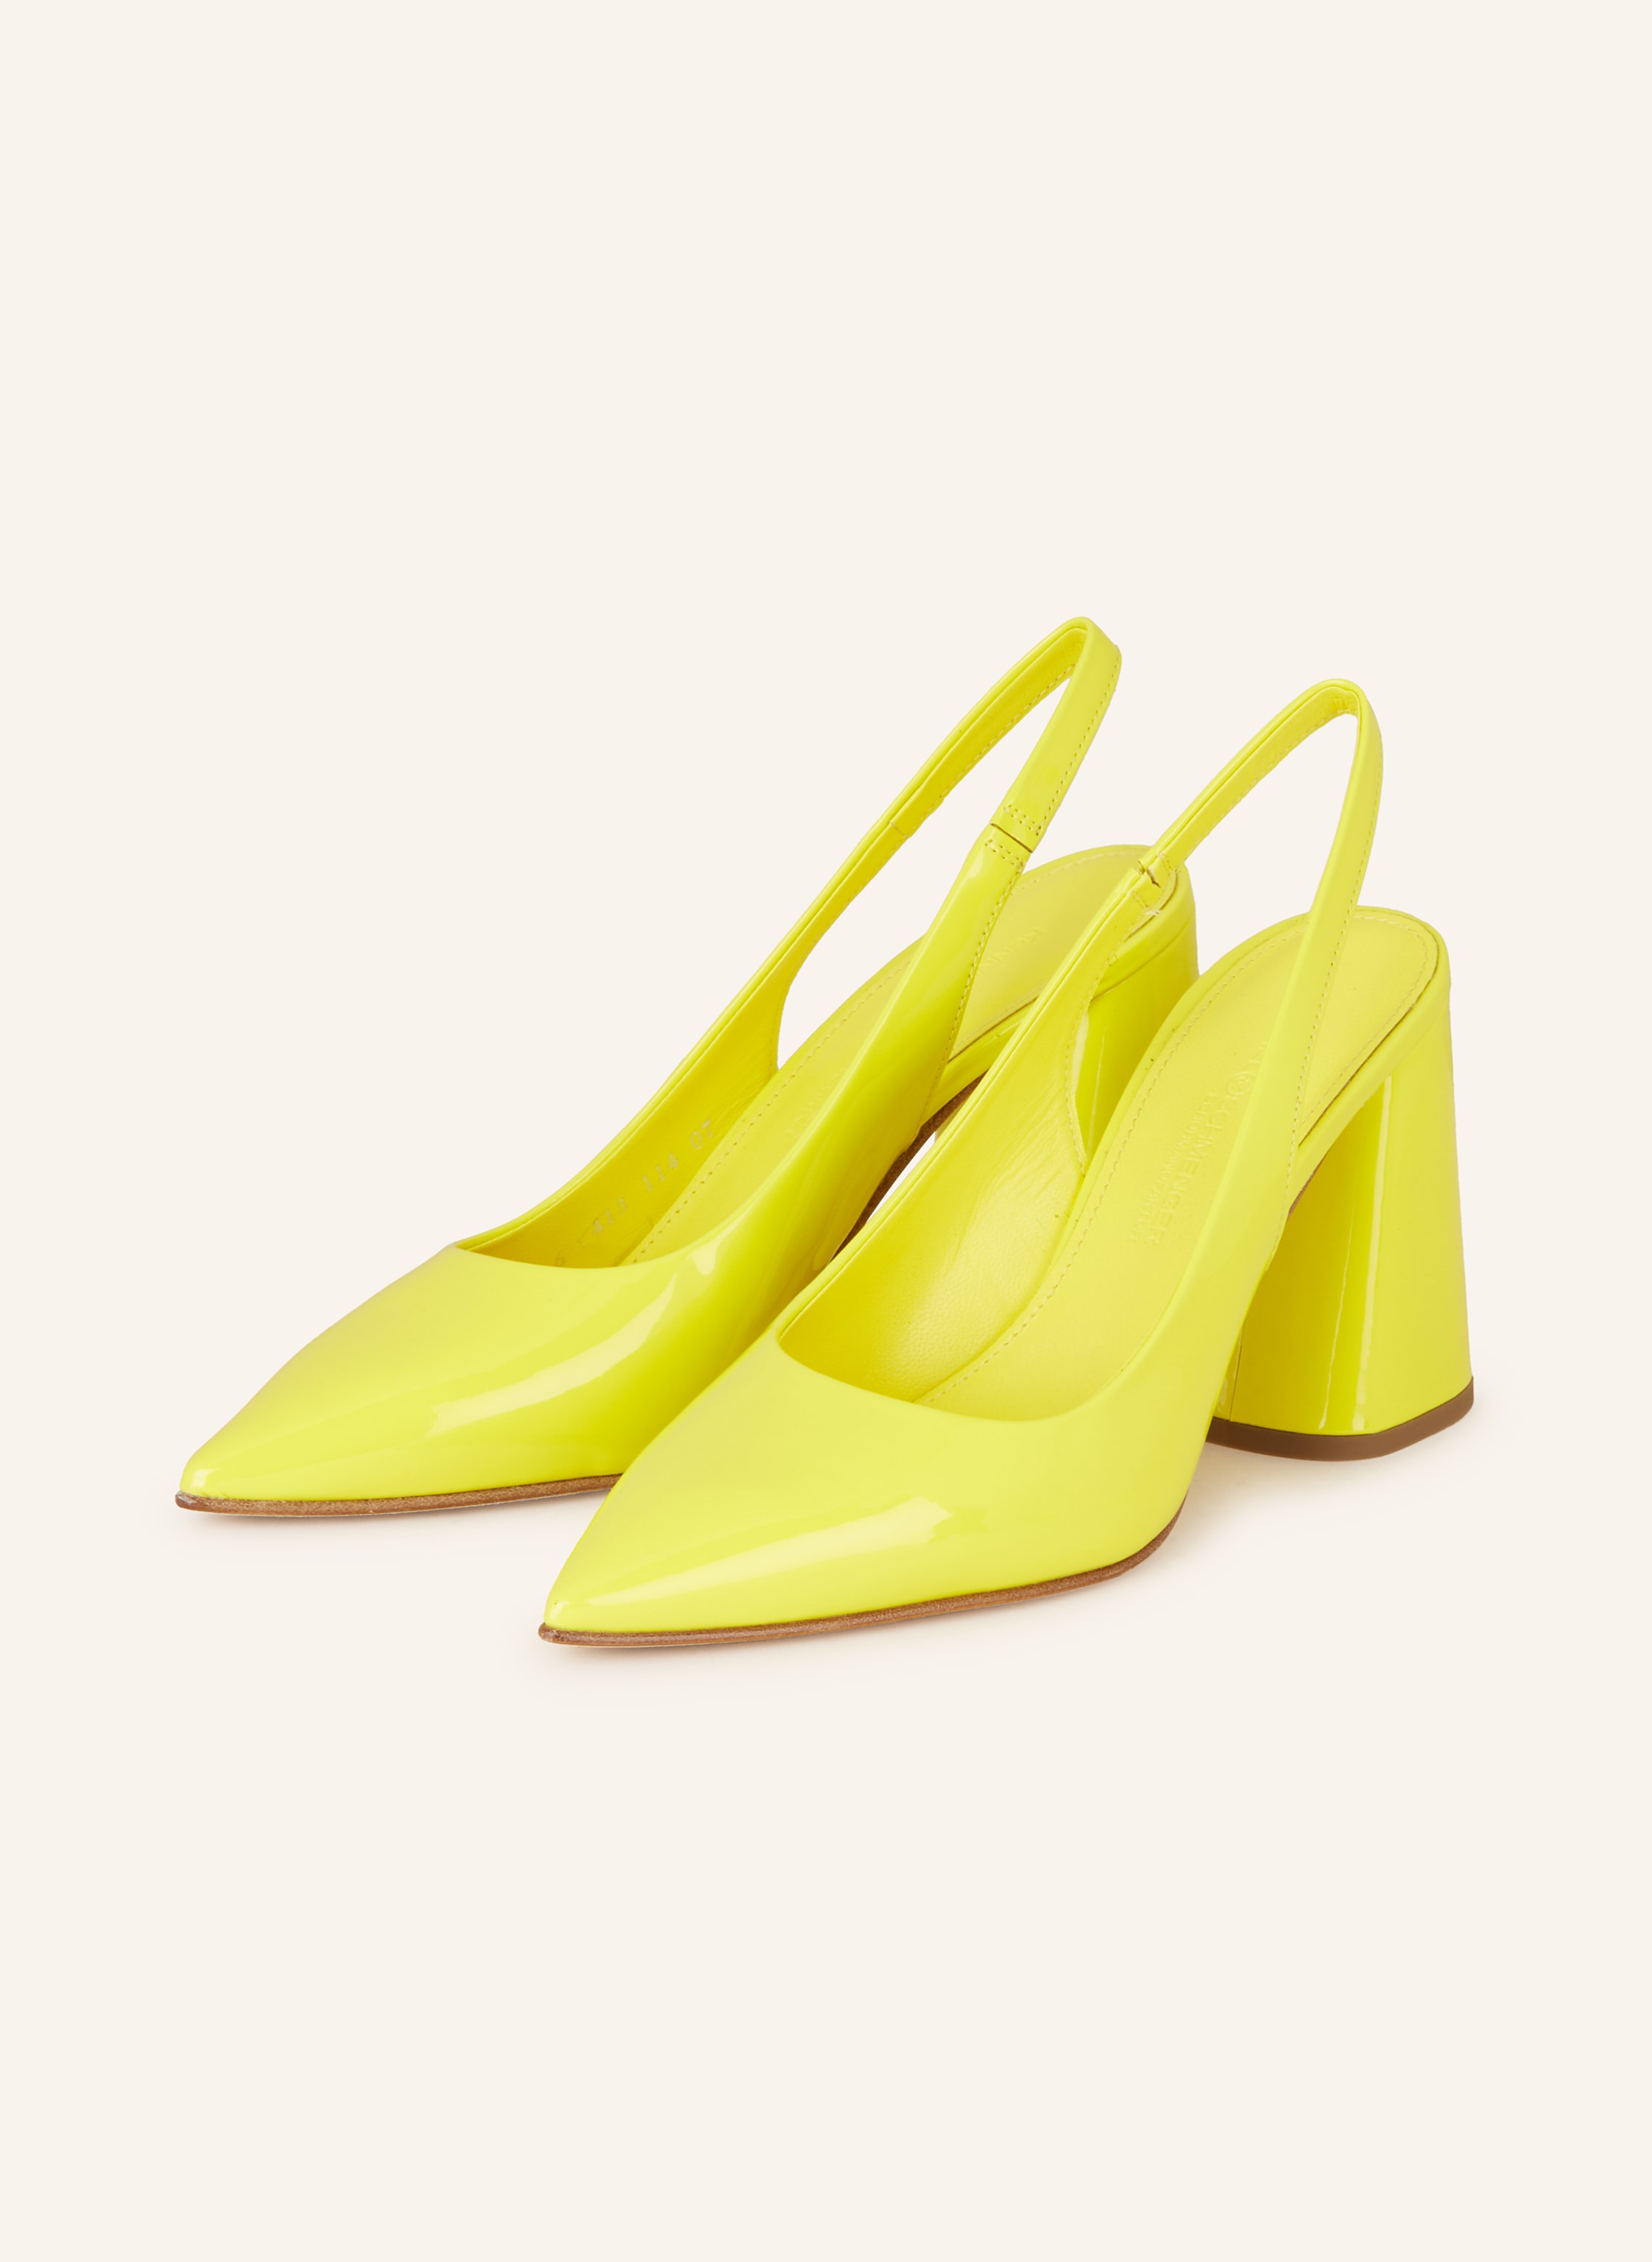 Yellow stamped leather kitten heel slingback made in italy